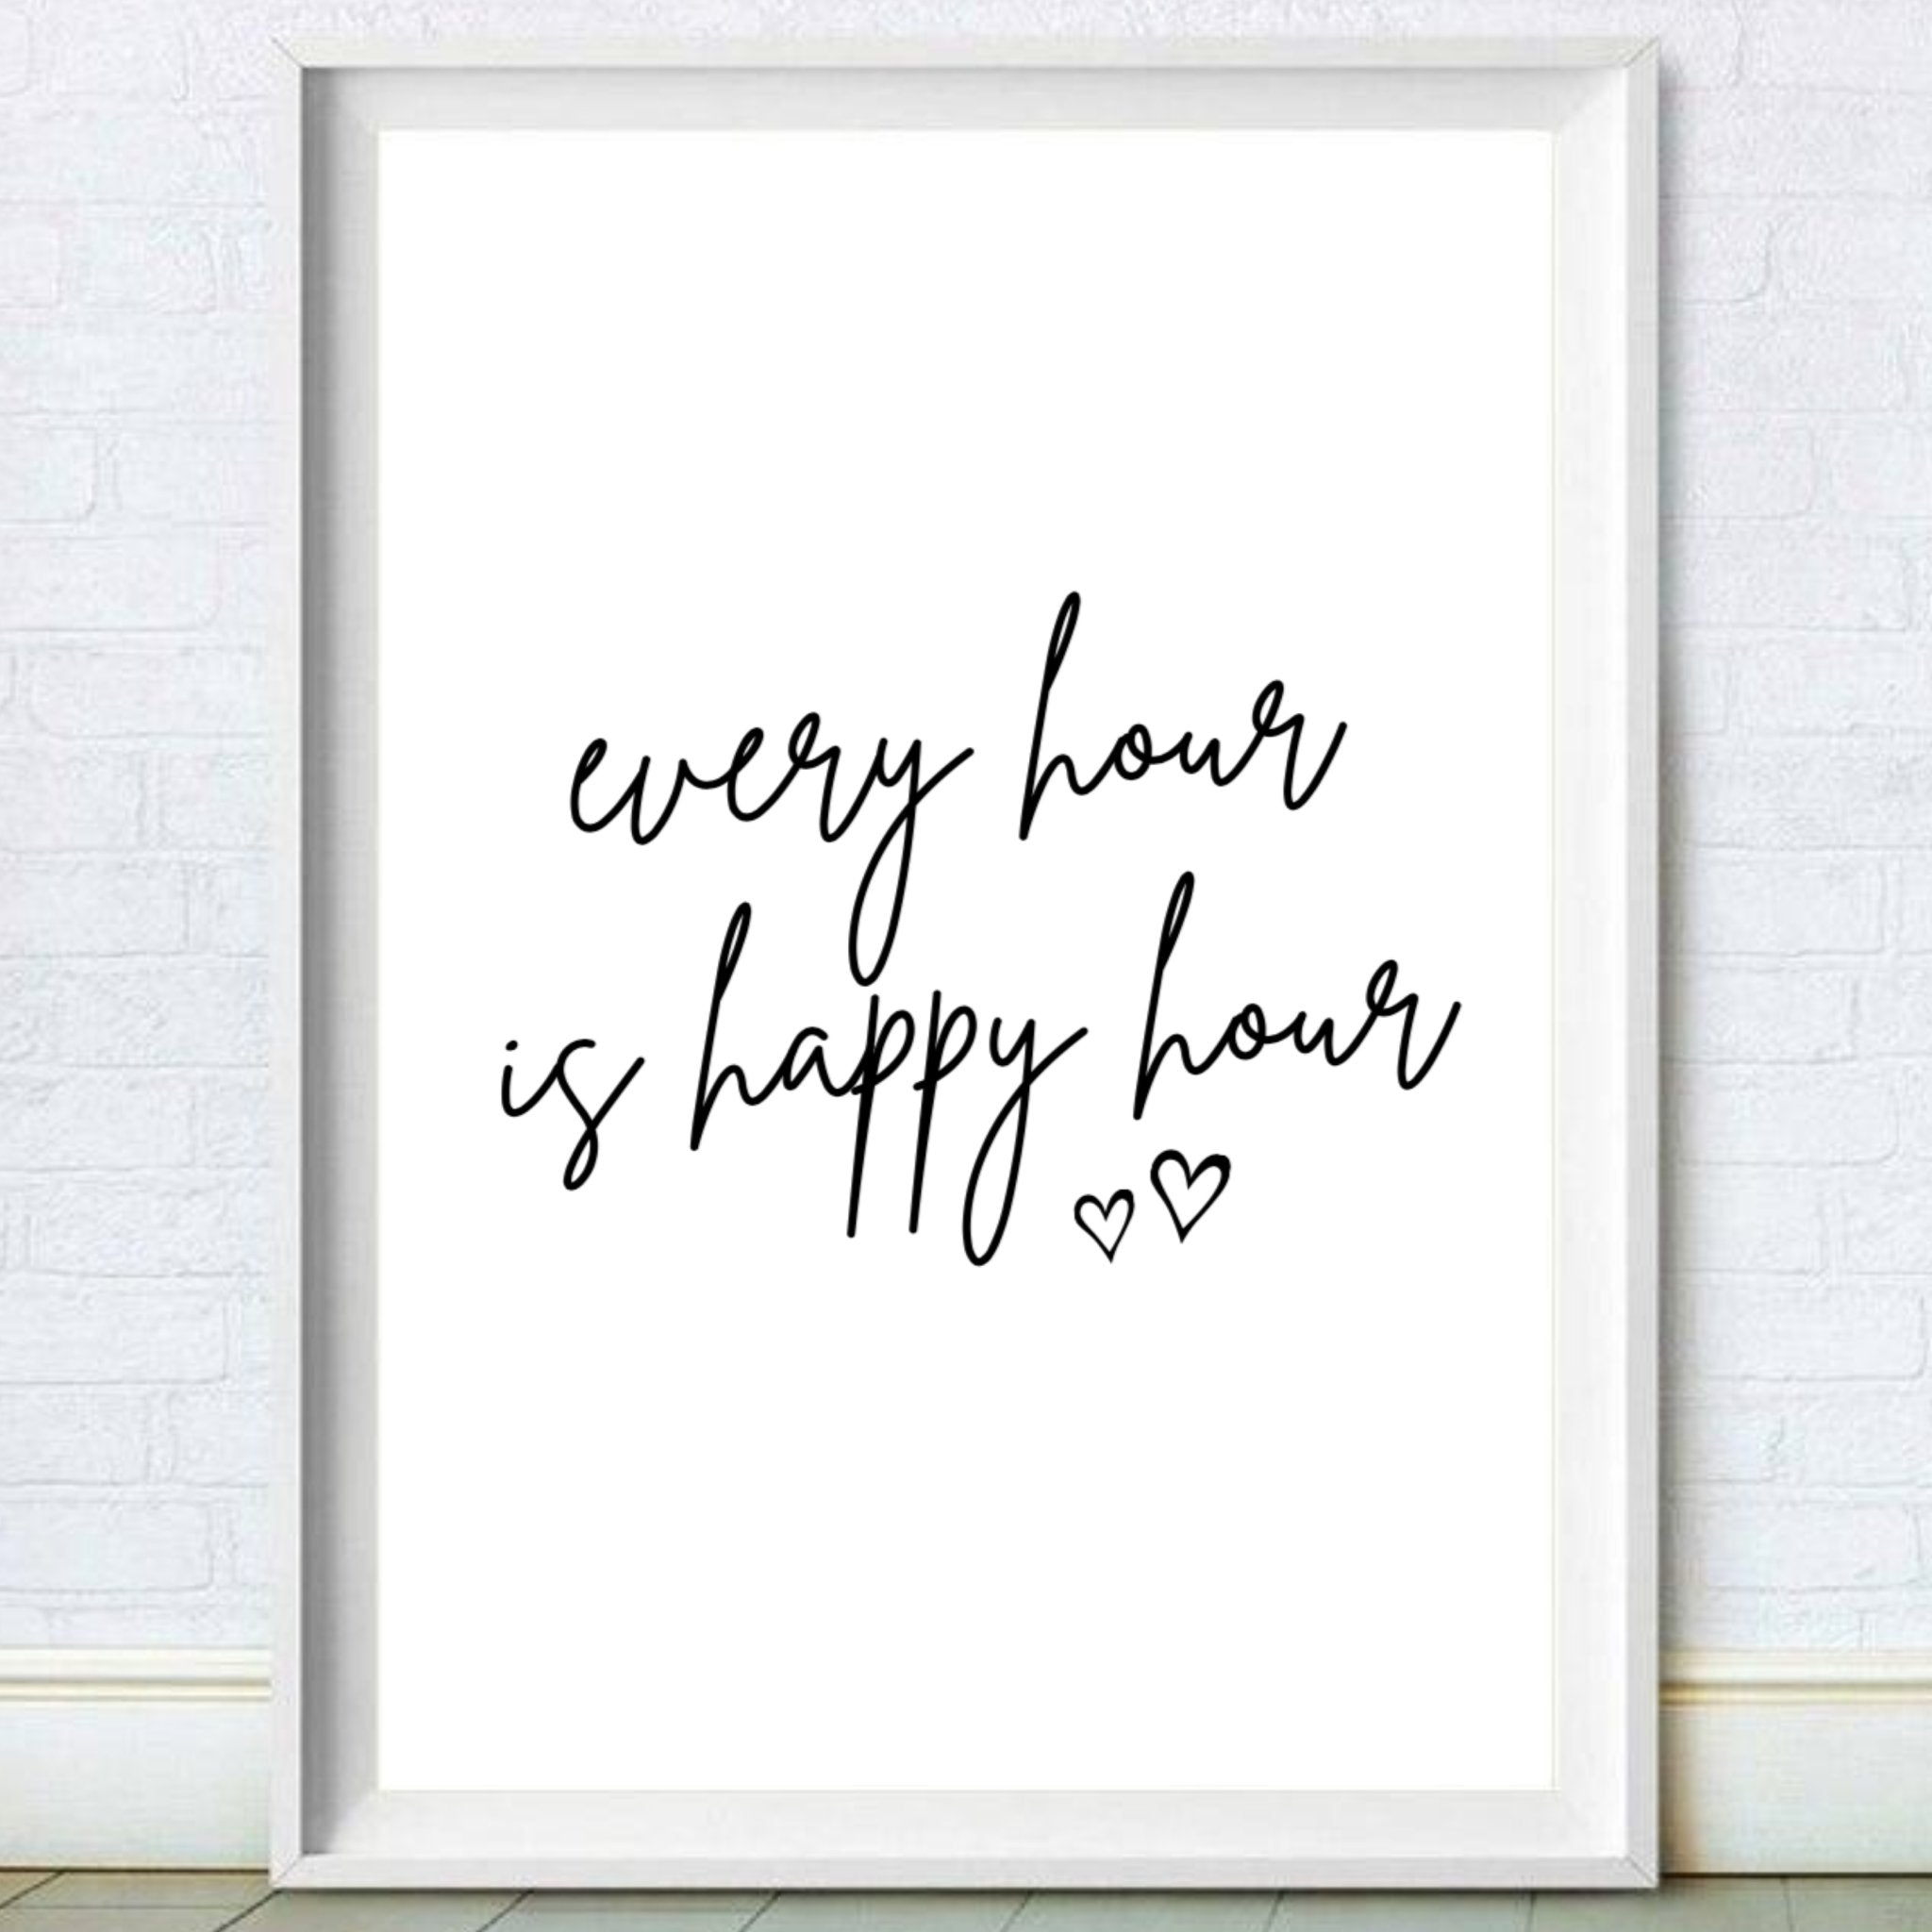 Every Hour is Happy Hour Print